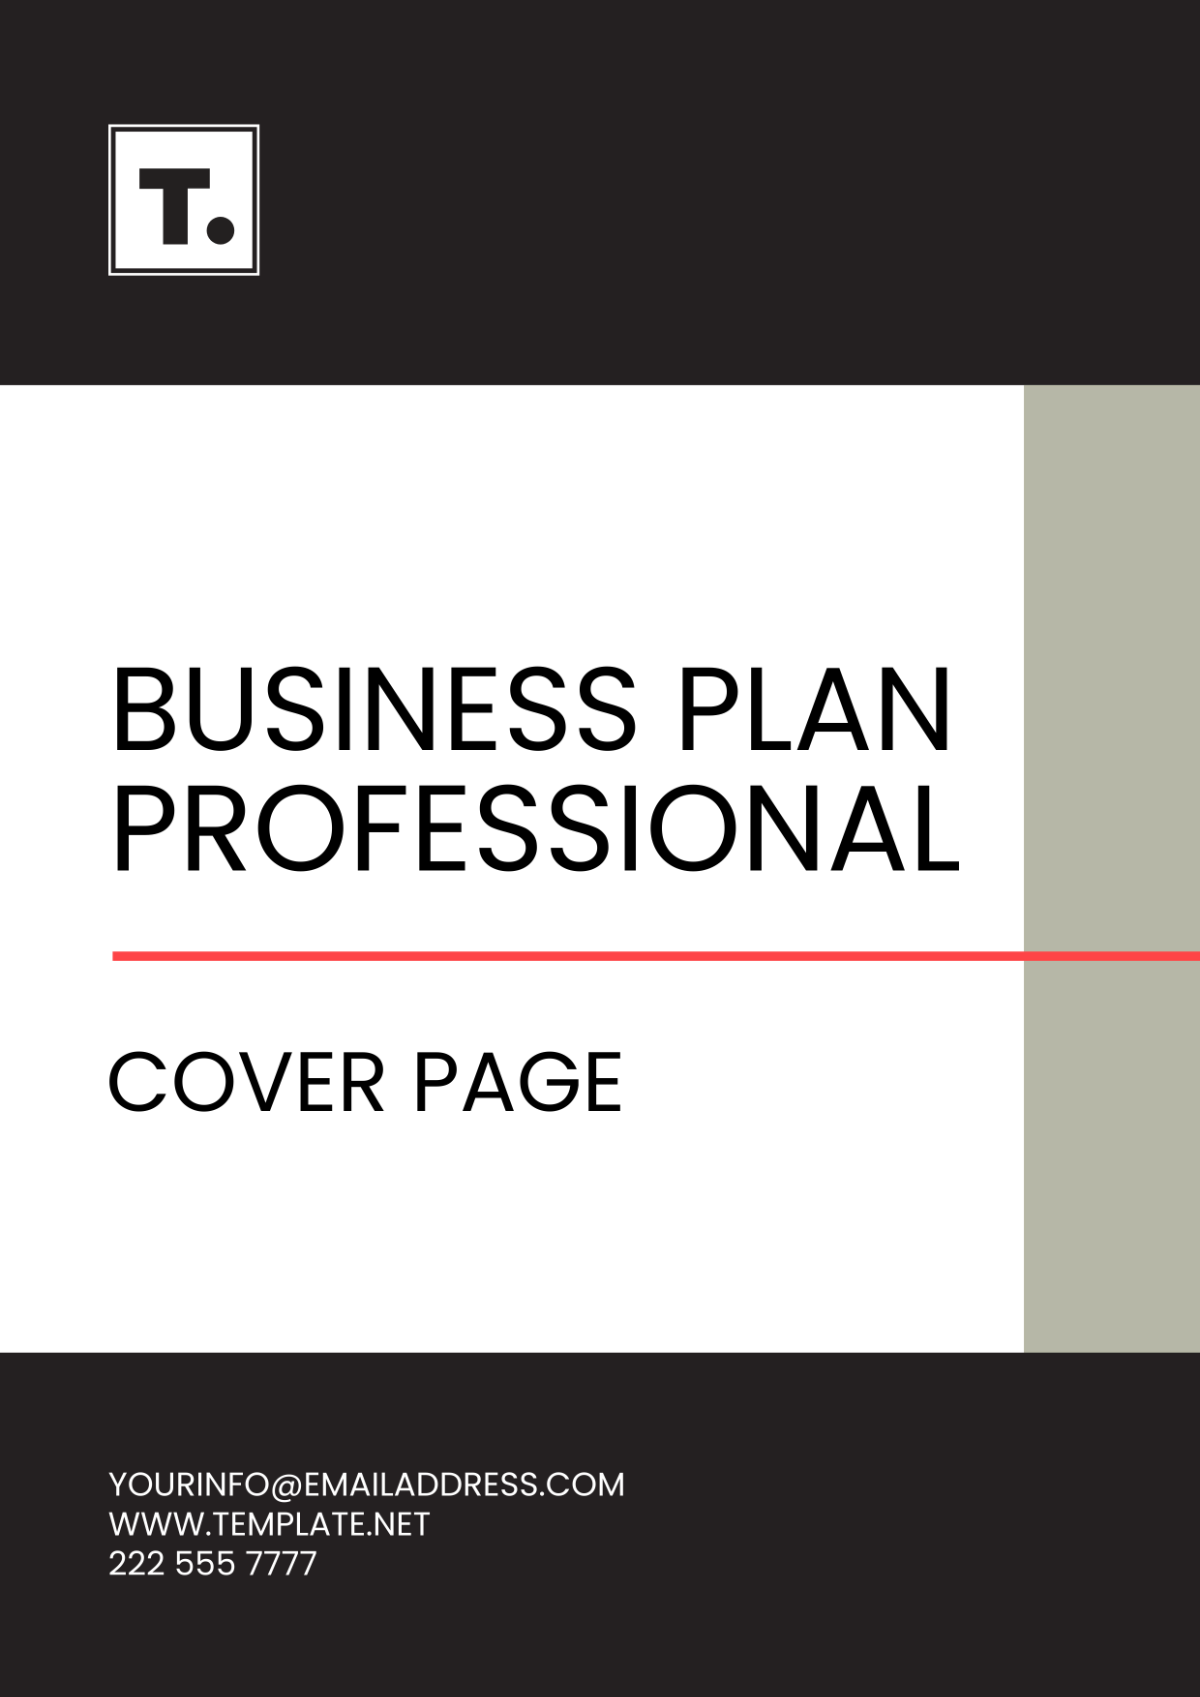 Free Business Plan Professional Cover Page Template